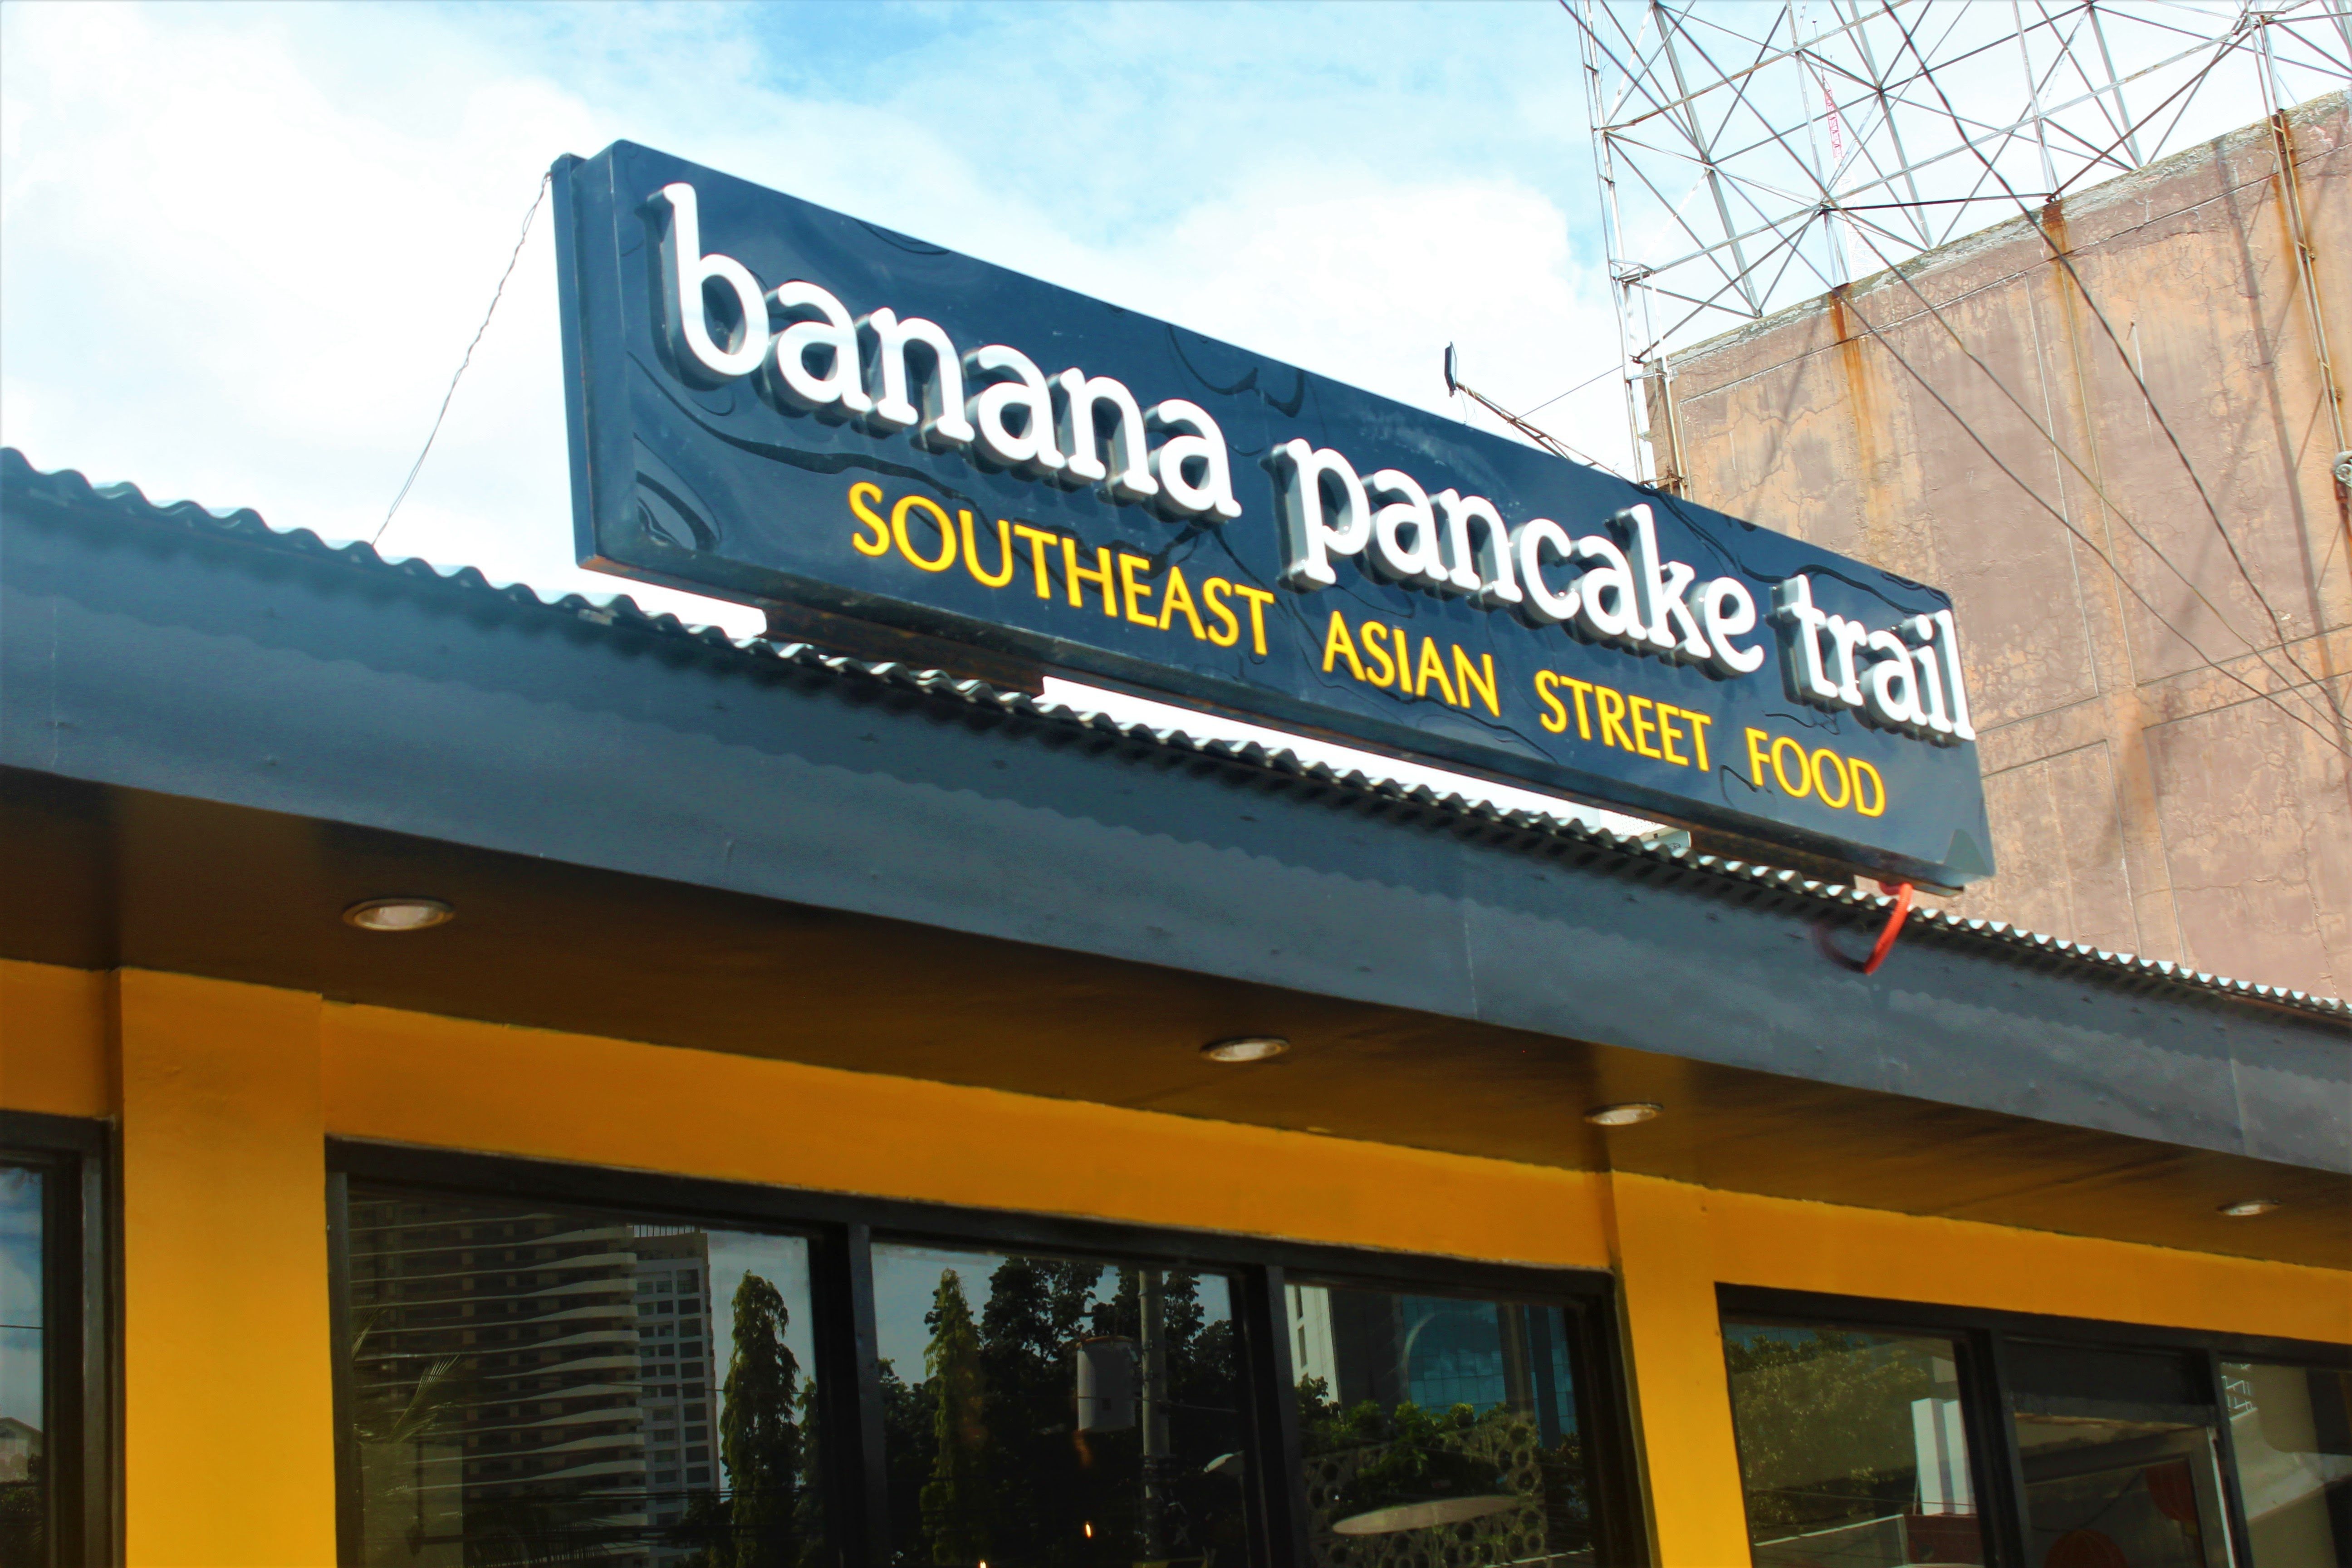 Cebu resto Banana Pancake Trail reserves place for special needs families